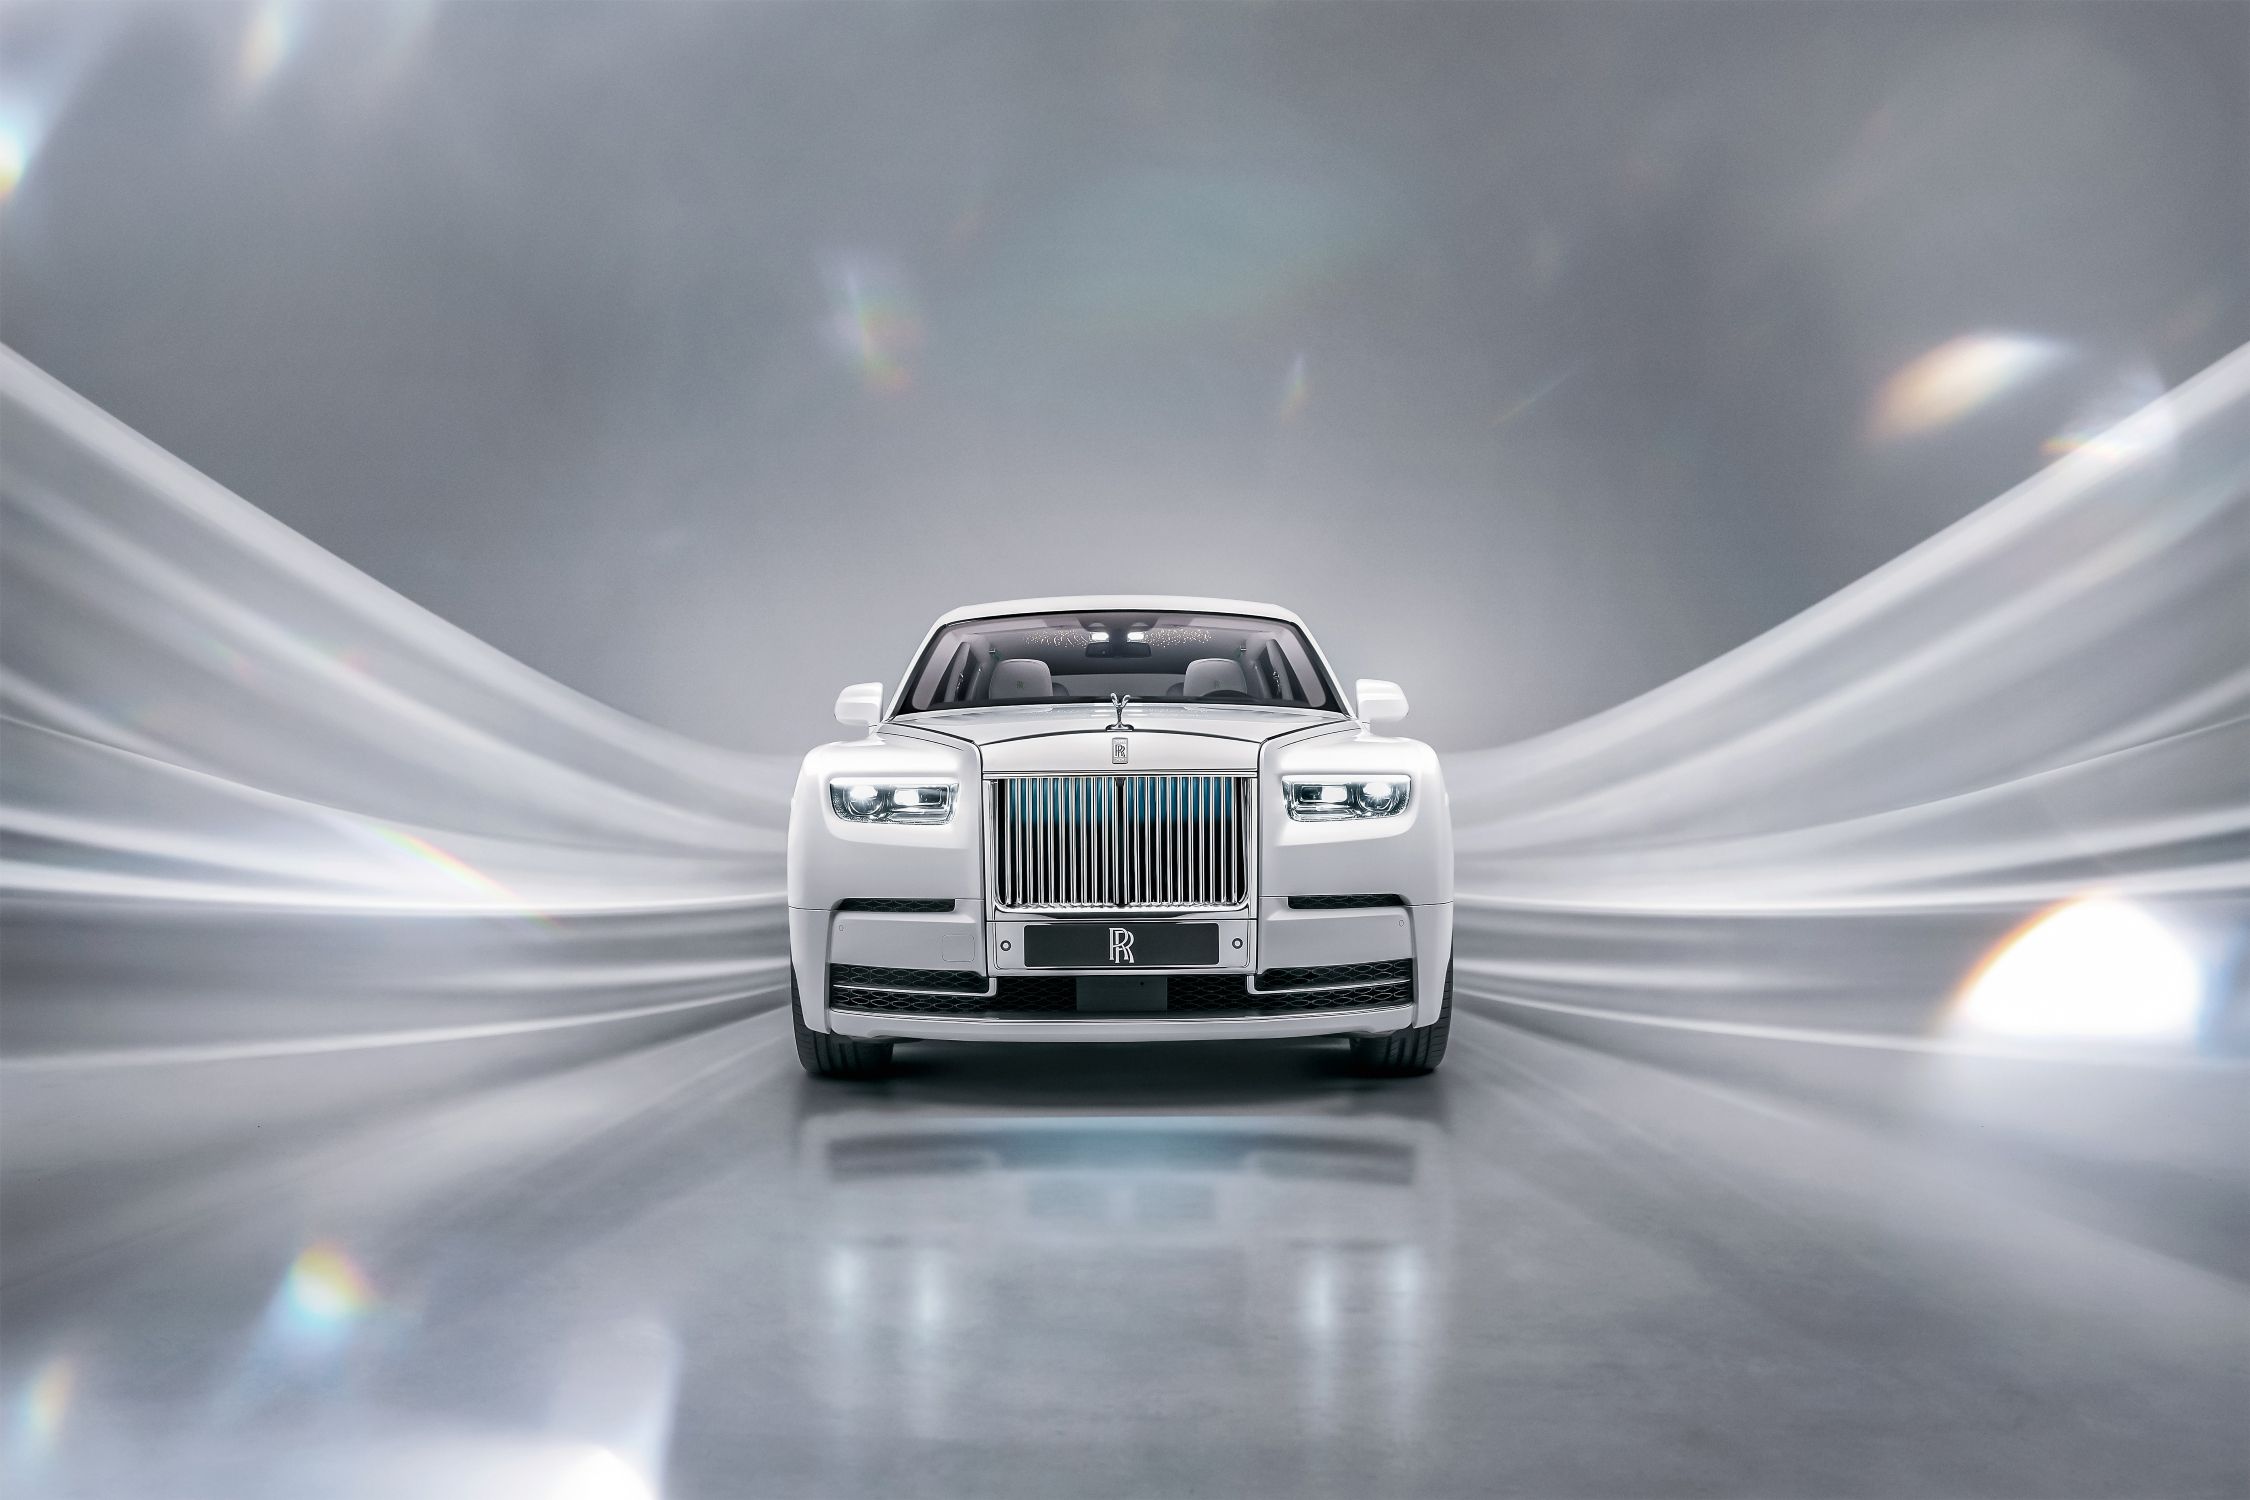 Rolls-Royce Refreshes Phantom With Sparkly Headlights, Disc Wheels